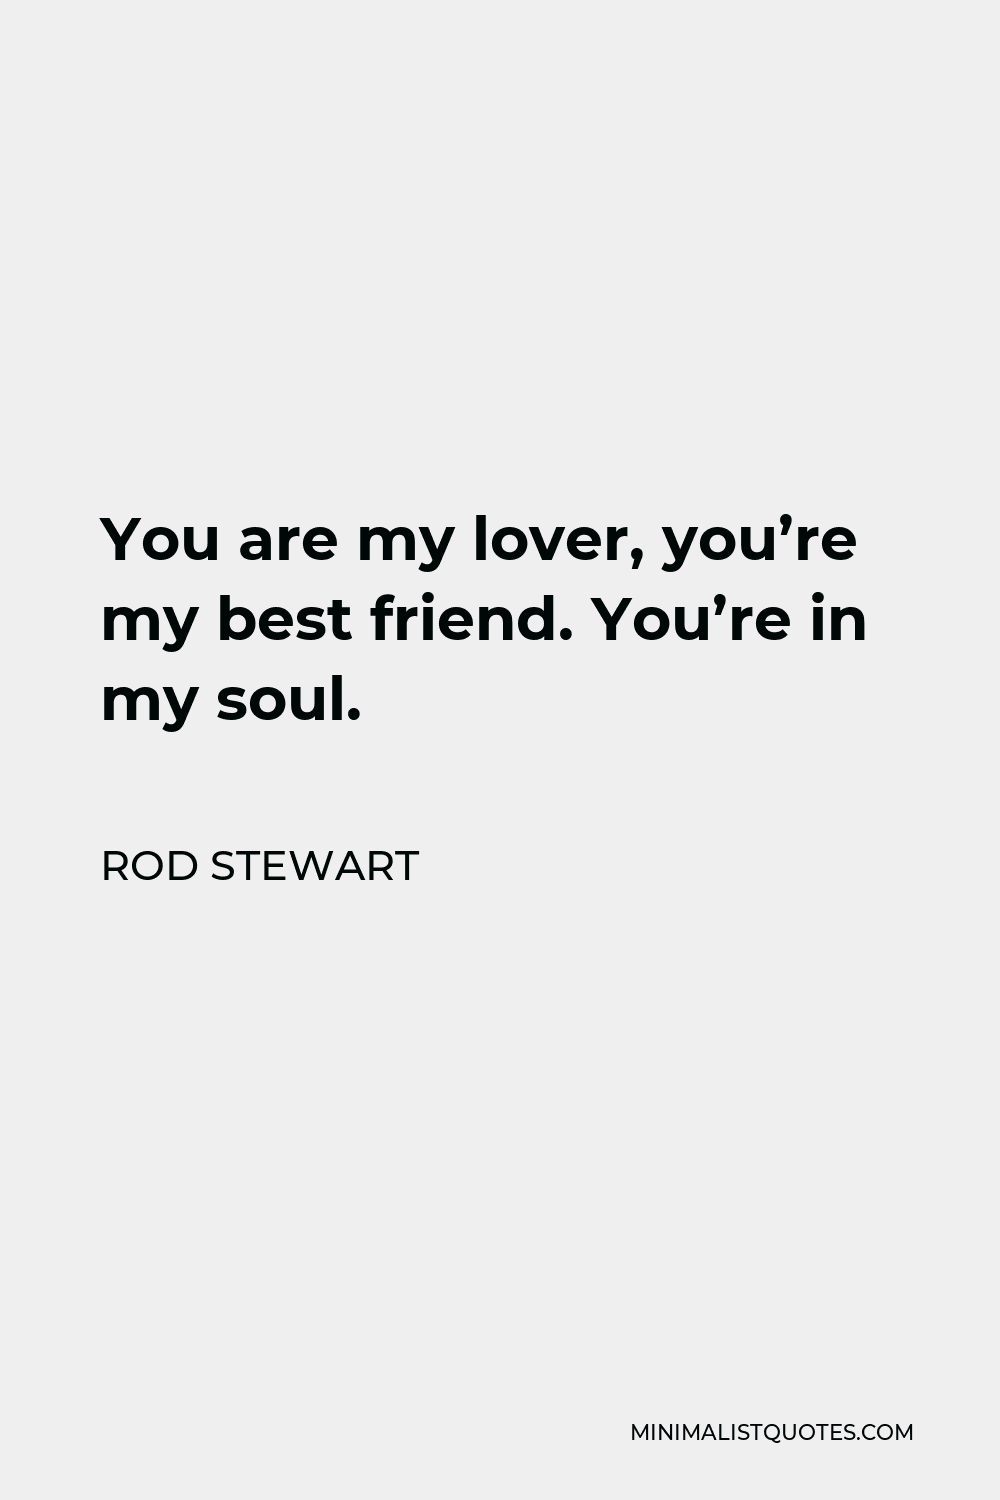 Rod Stewart Quote - You are my lover, you’re my best friend. You’re in my soul.